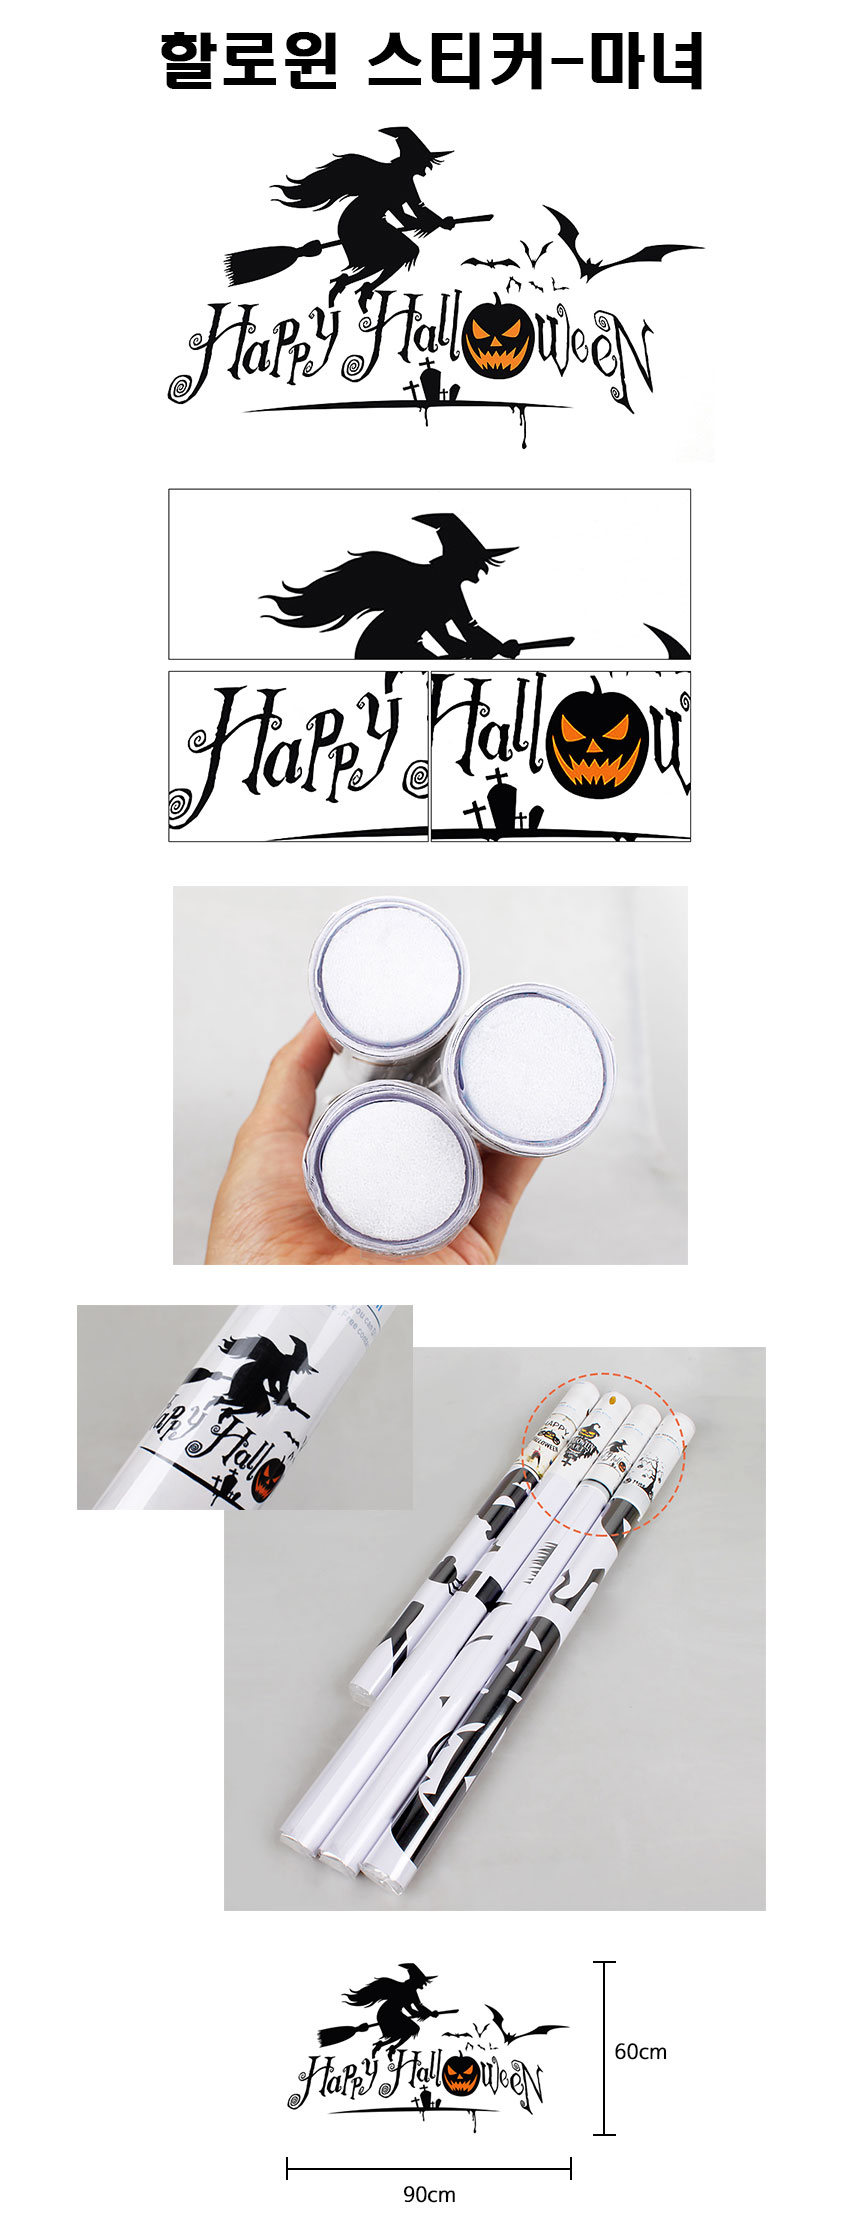 http://partyb2b.mireene.kr/img/party/Halloween/Hallow-ST-Witch.jpg